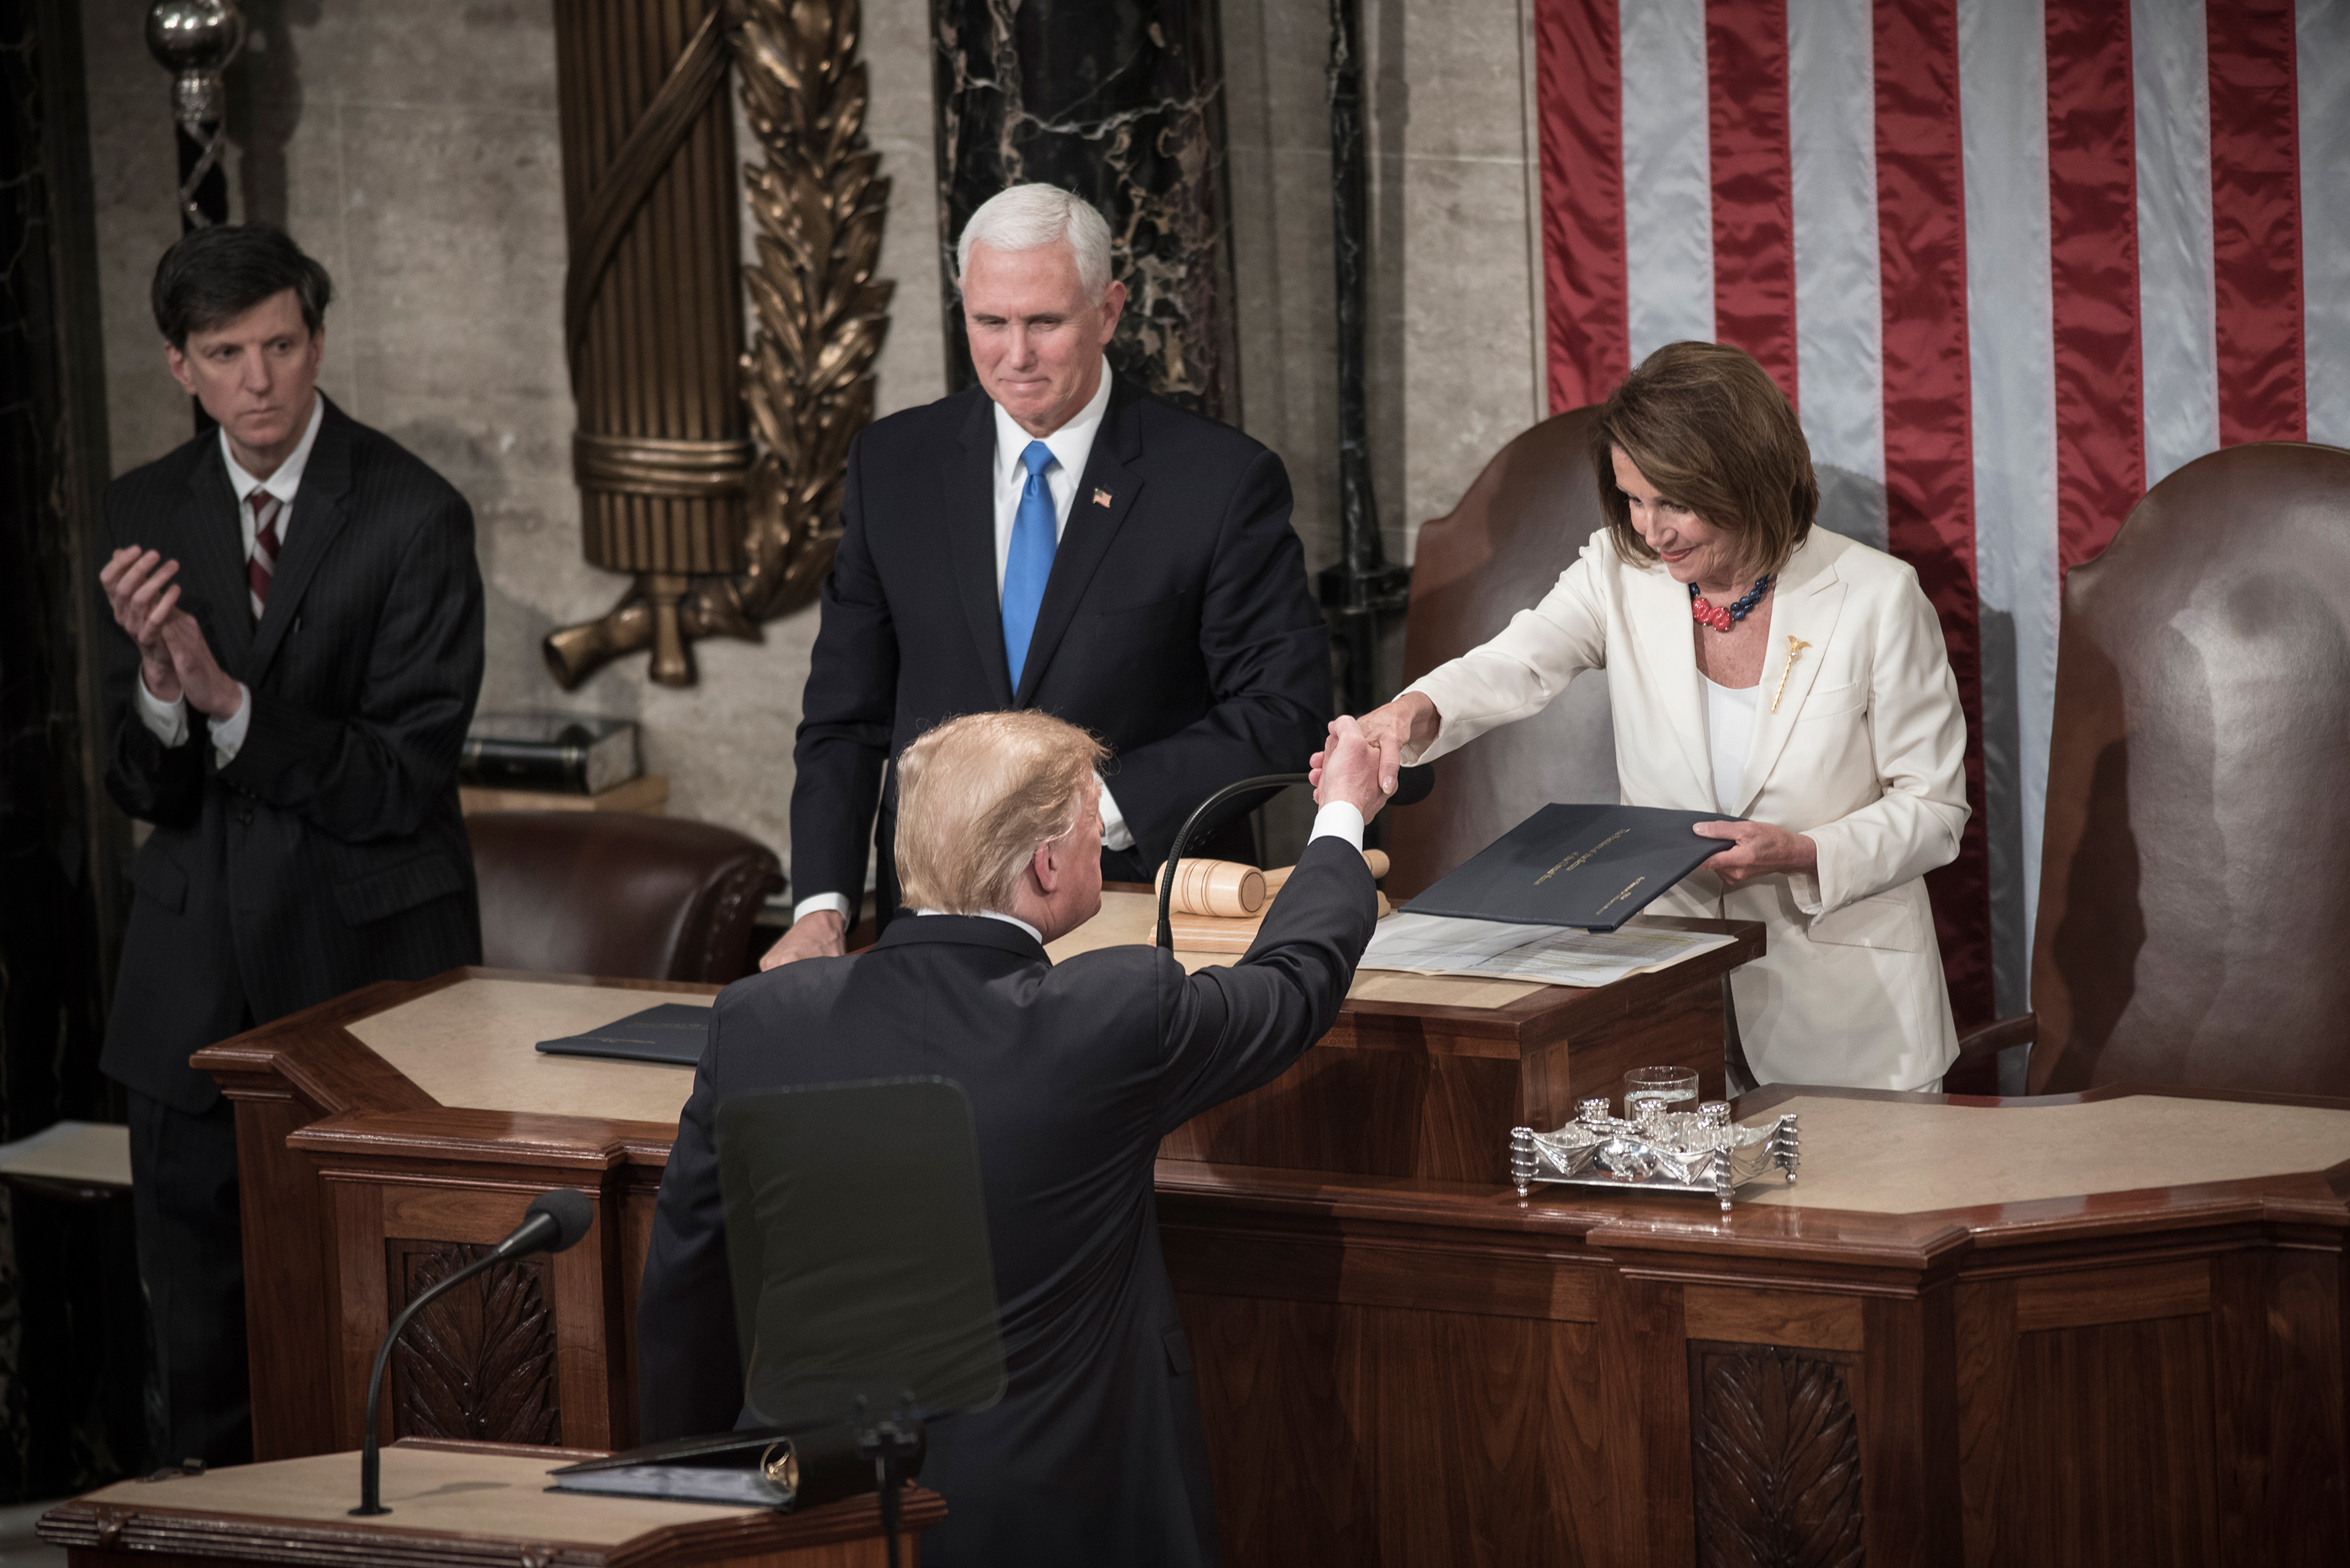 President Trump and House Speaker Nancy Pelosi shake hands at the State of the Union speech on Feb. 5, 2019. (David Butow—Redux for TIME)